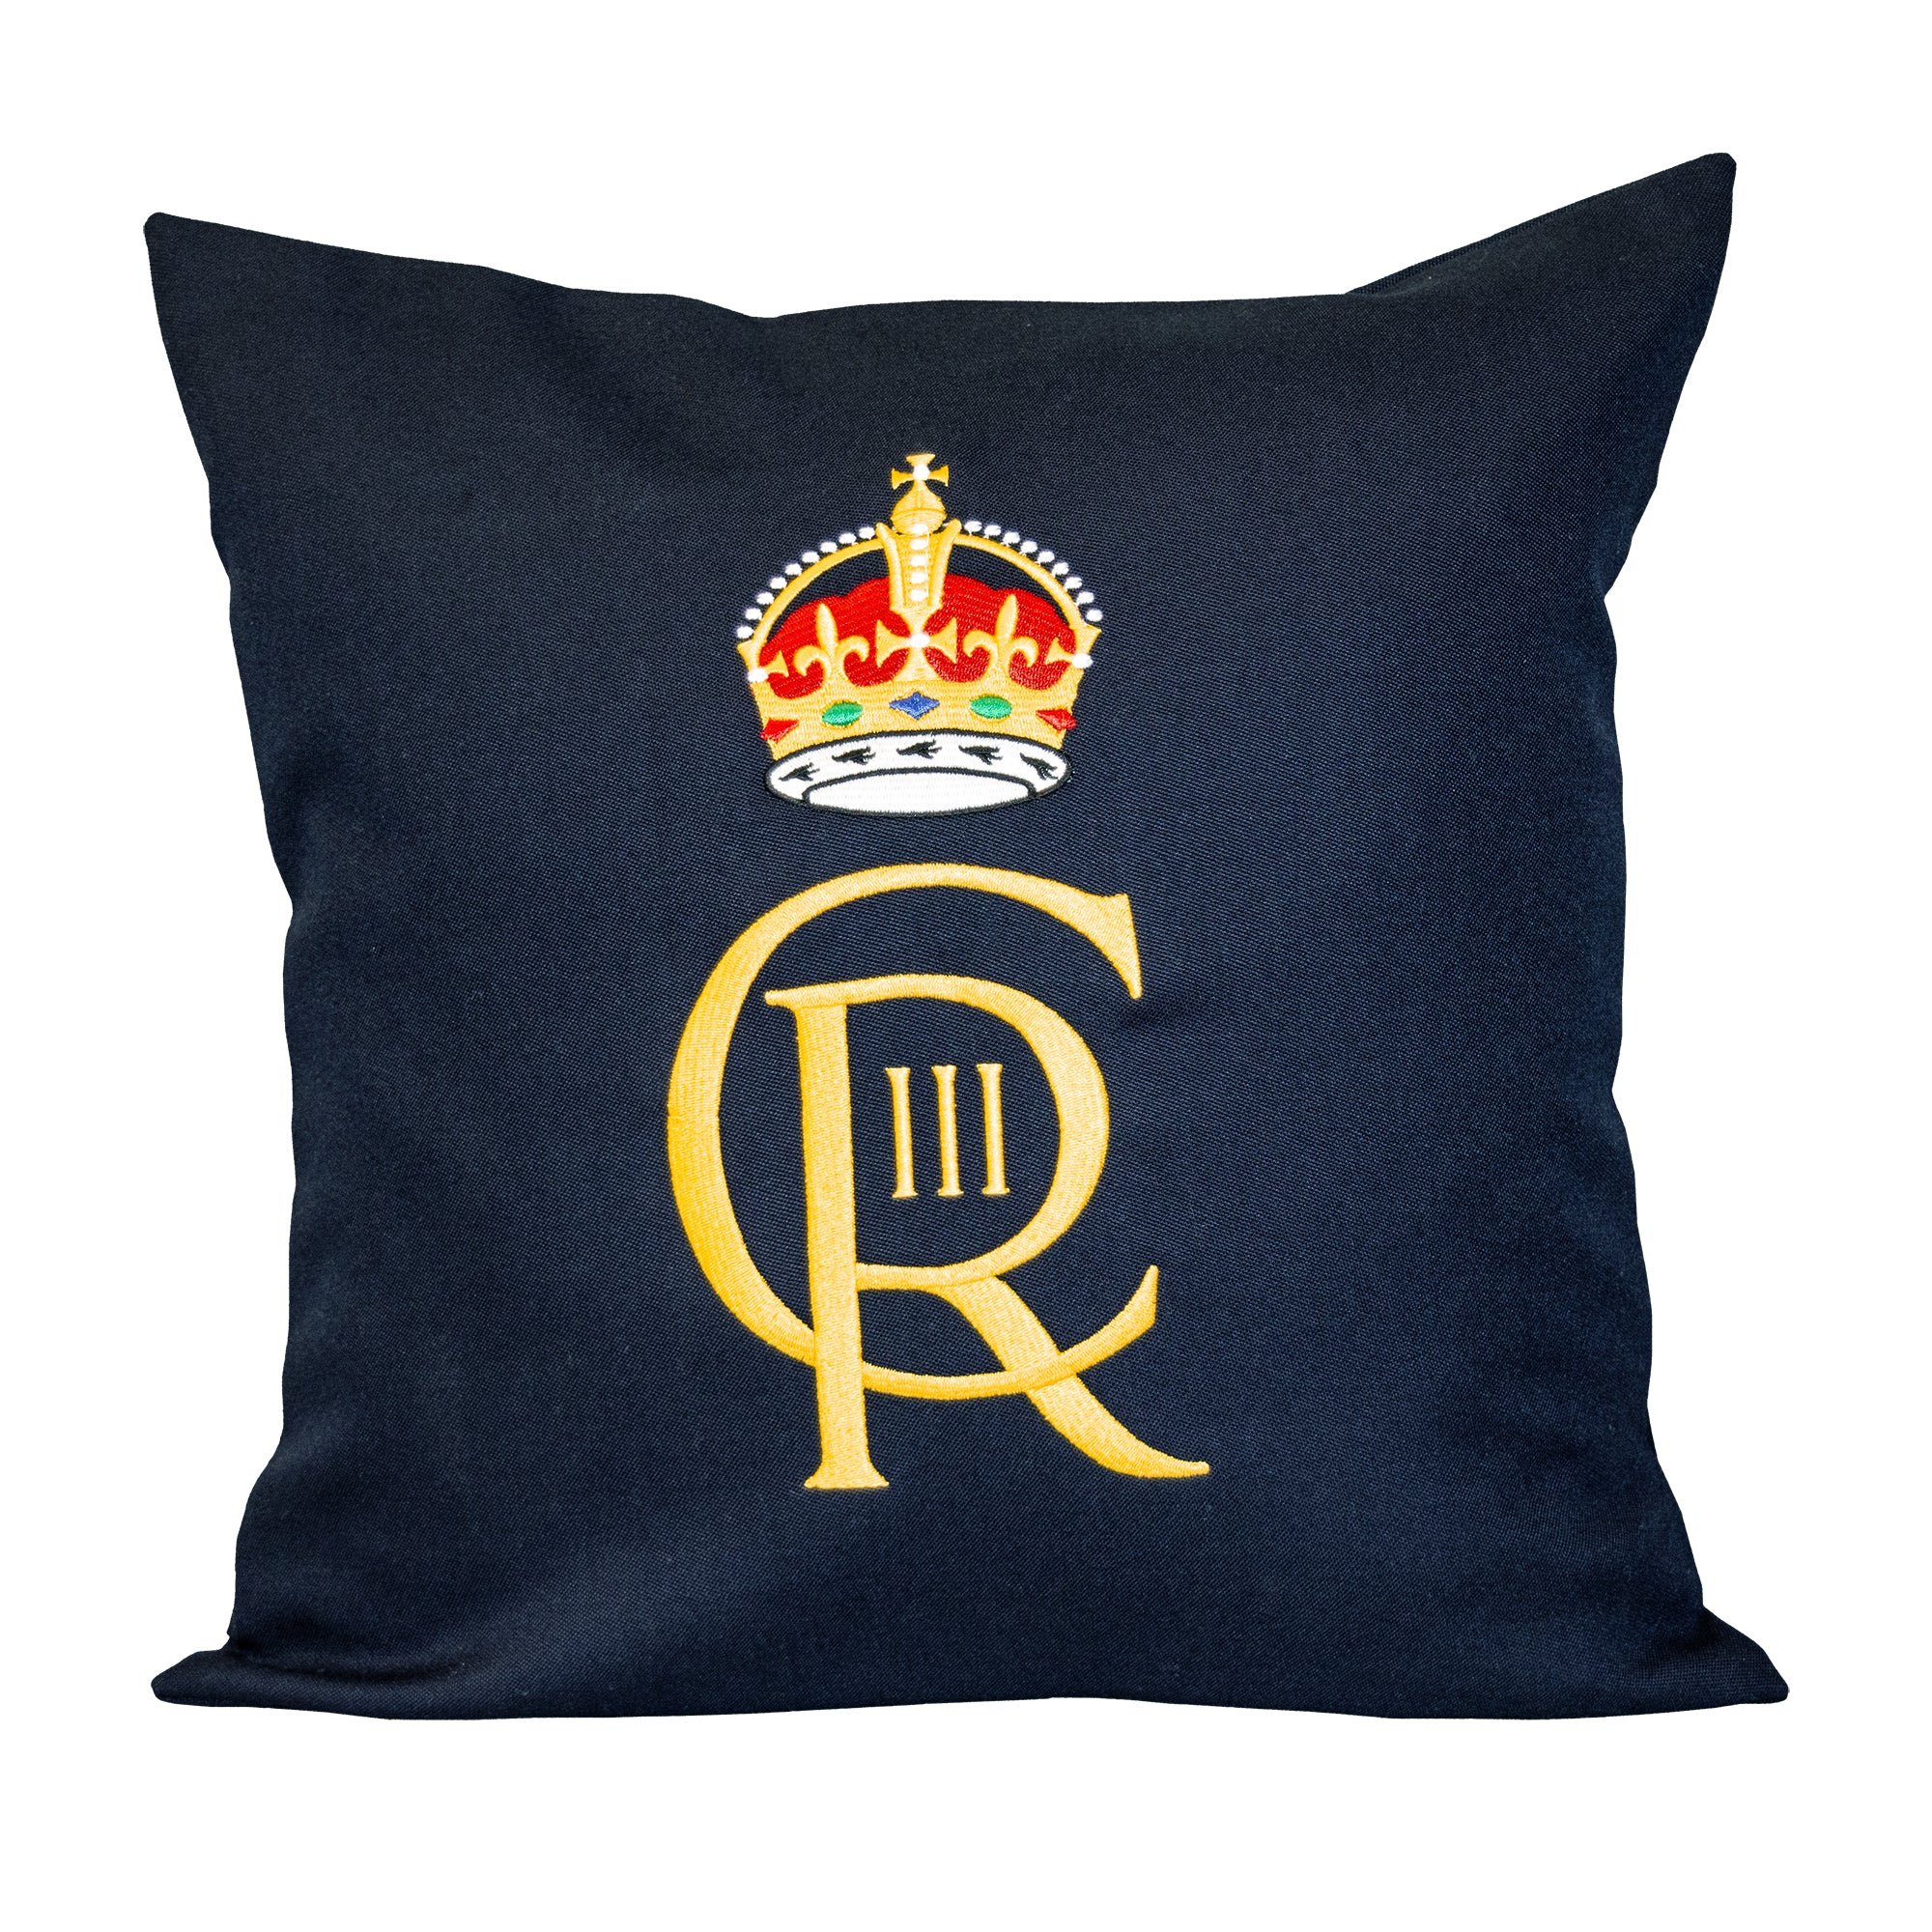 CIIIR Cypher (King's Crown) Machine Embroidered Cushion Cover